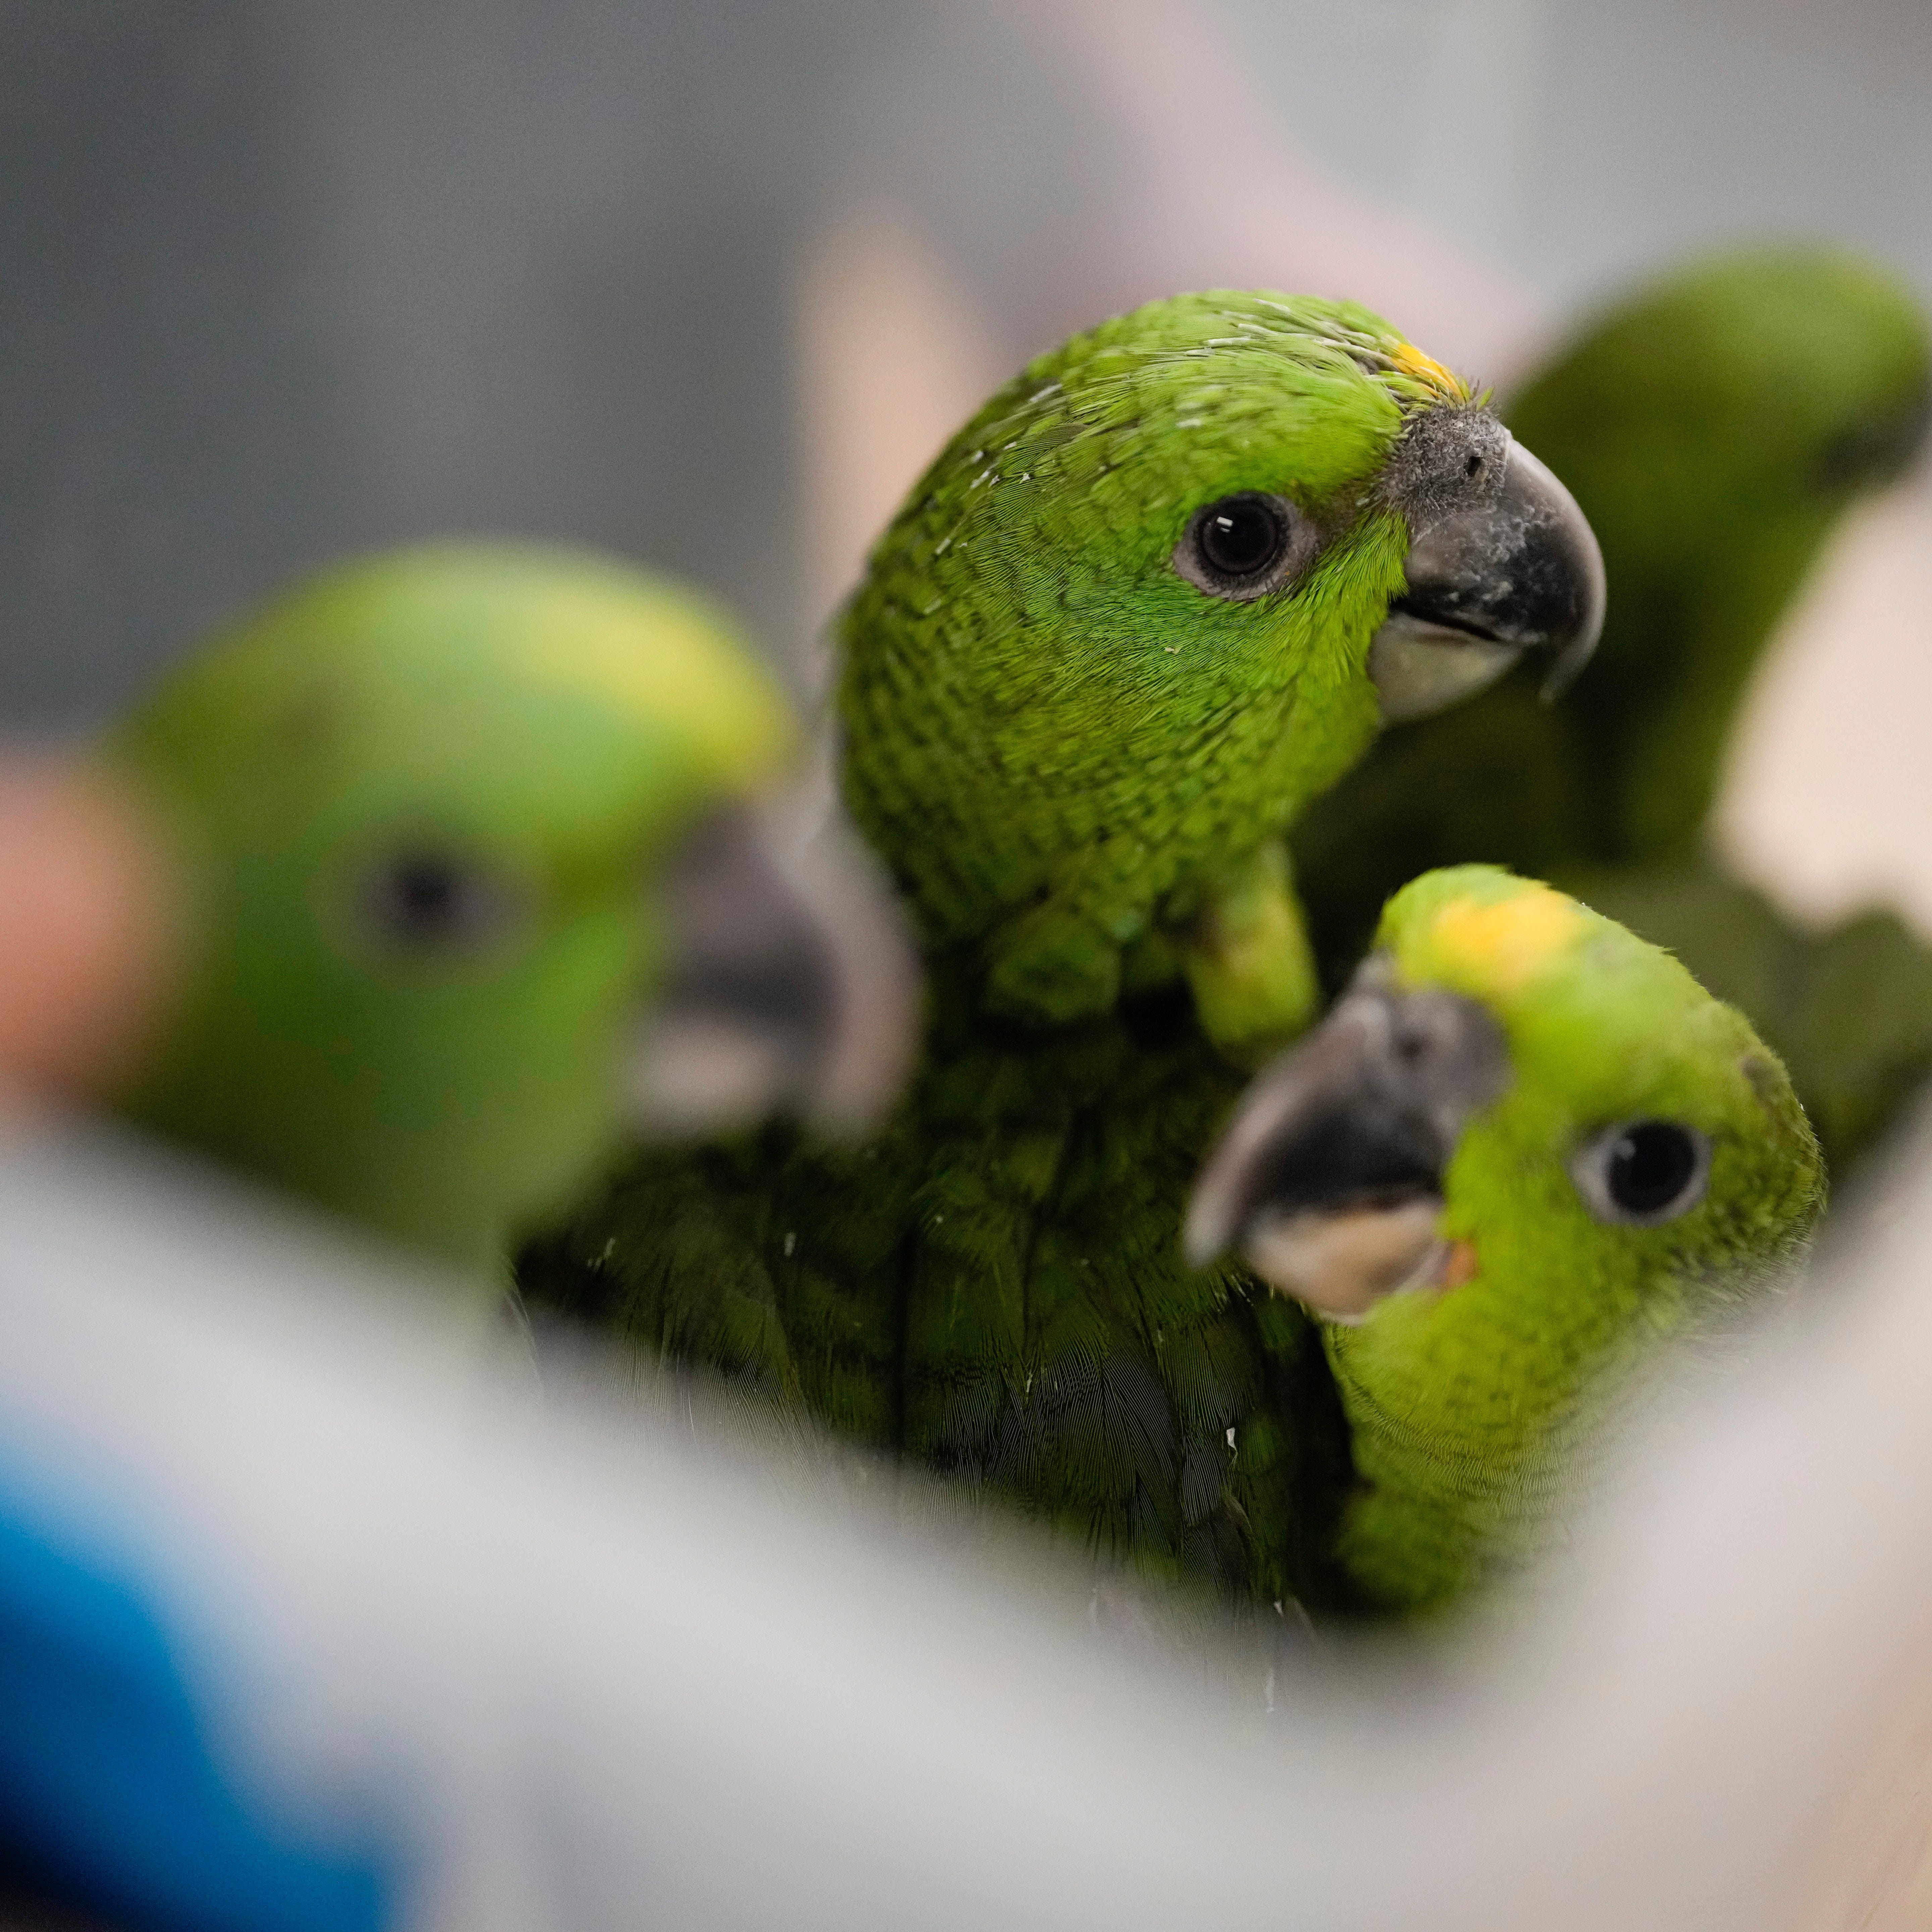 Young yellow-naped Amazon parrots are carried in a plastic tub at the Rare Species Conservatory Foundation in Loxahatchee, Fla., Friday, May 19, 2023. According to a criminal complaint, a smuggler was caught with 29 parrot eggs at Miami International Airport in late March when the eggs began hatching in his carry-on bag while in transit. The RSCF is raising the 24 surviving yellow-naped and red-lored parrots while looking for a long-term home for the birds.